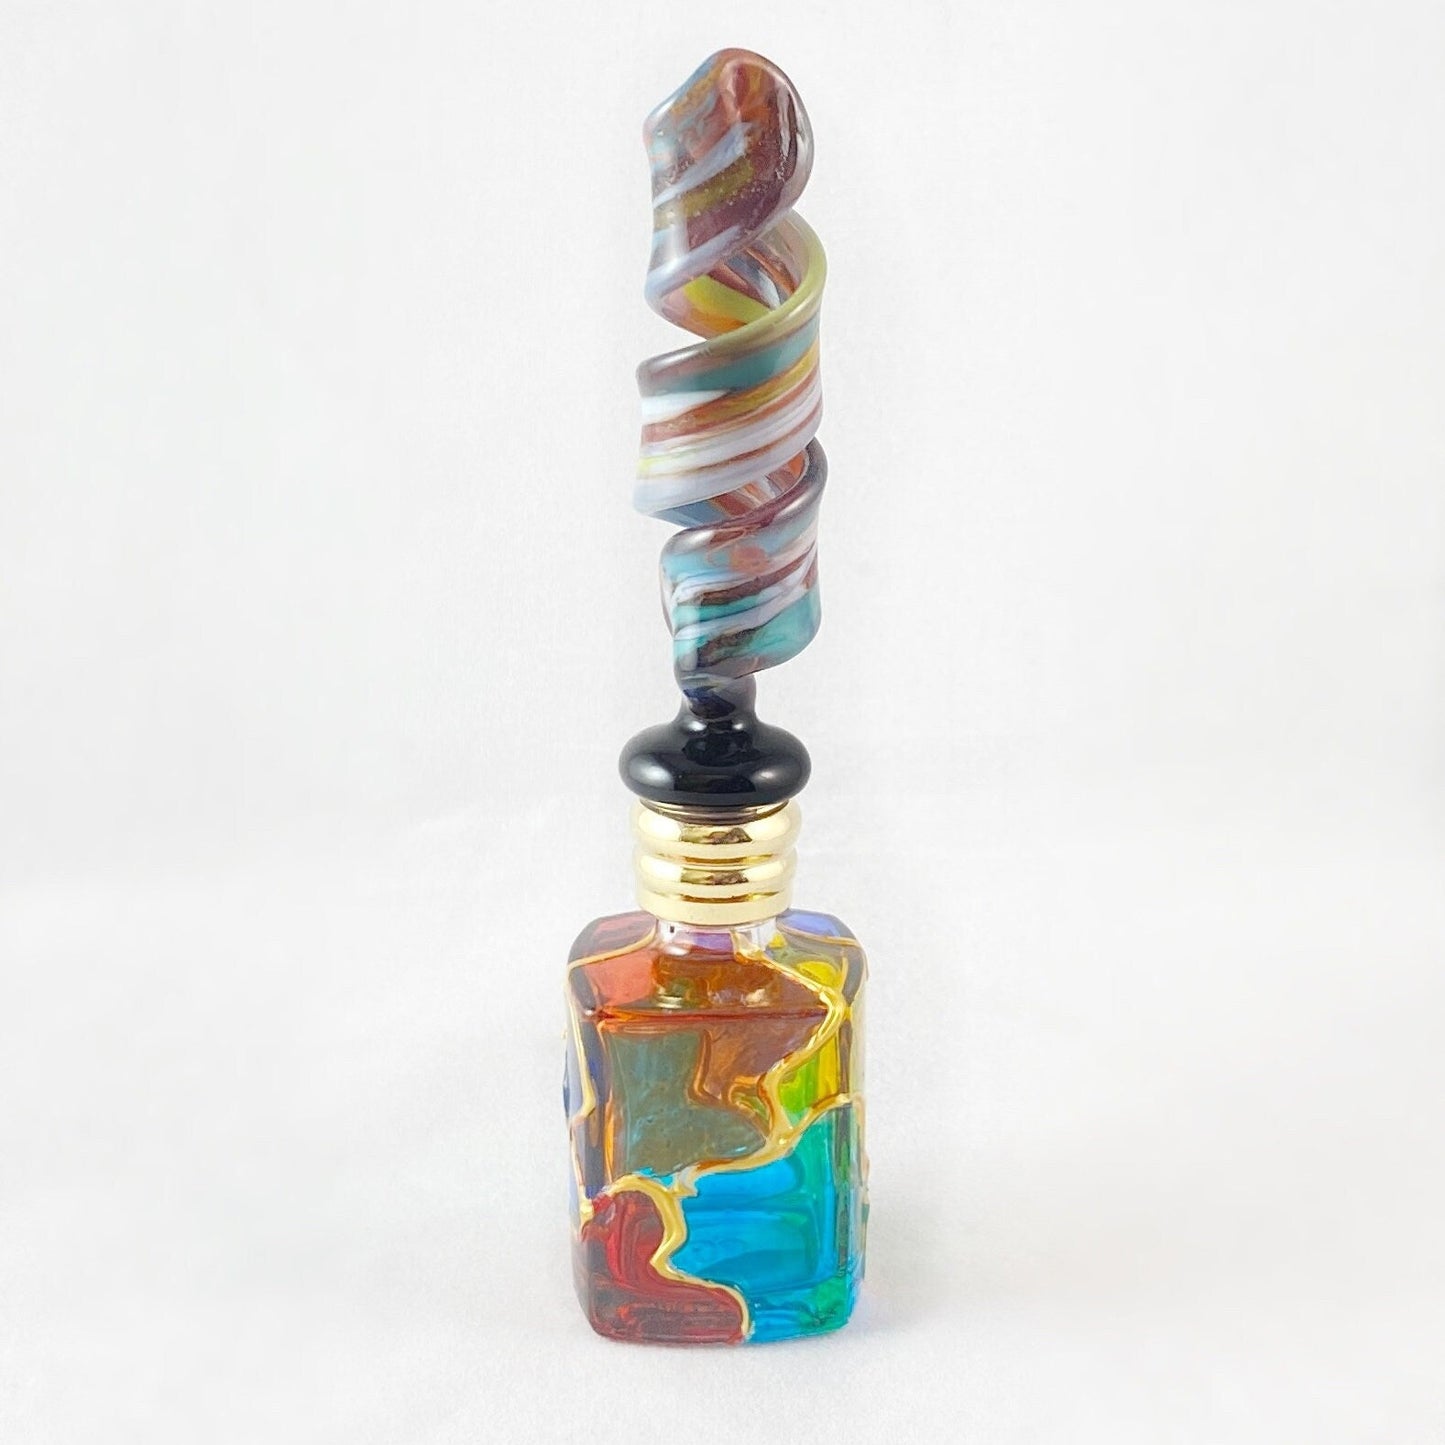 Curly Top Venetian Glass Perfume Bottle - Handmade in Italy, Colorful Murano Glass